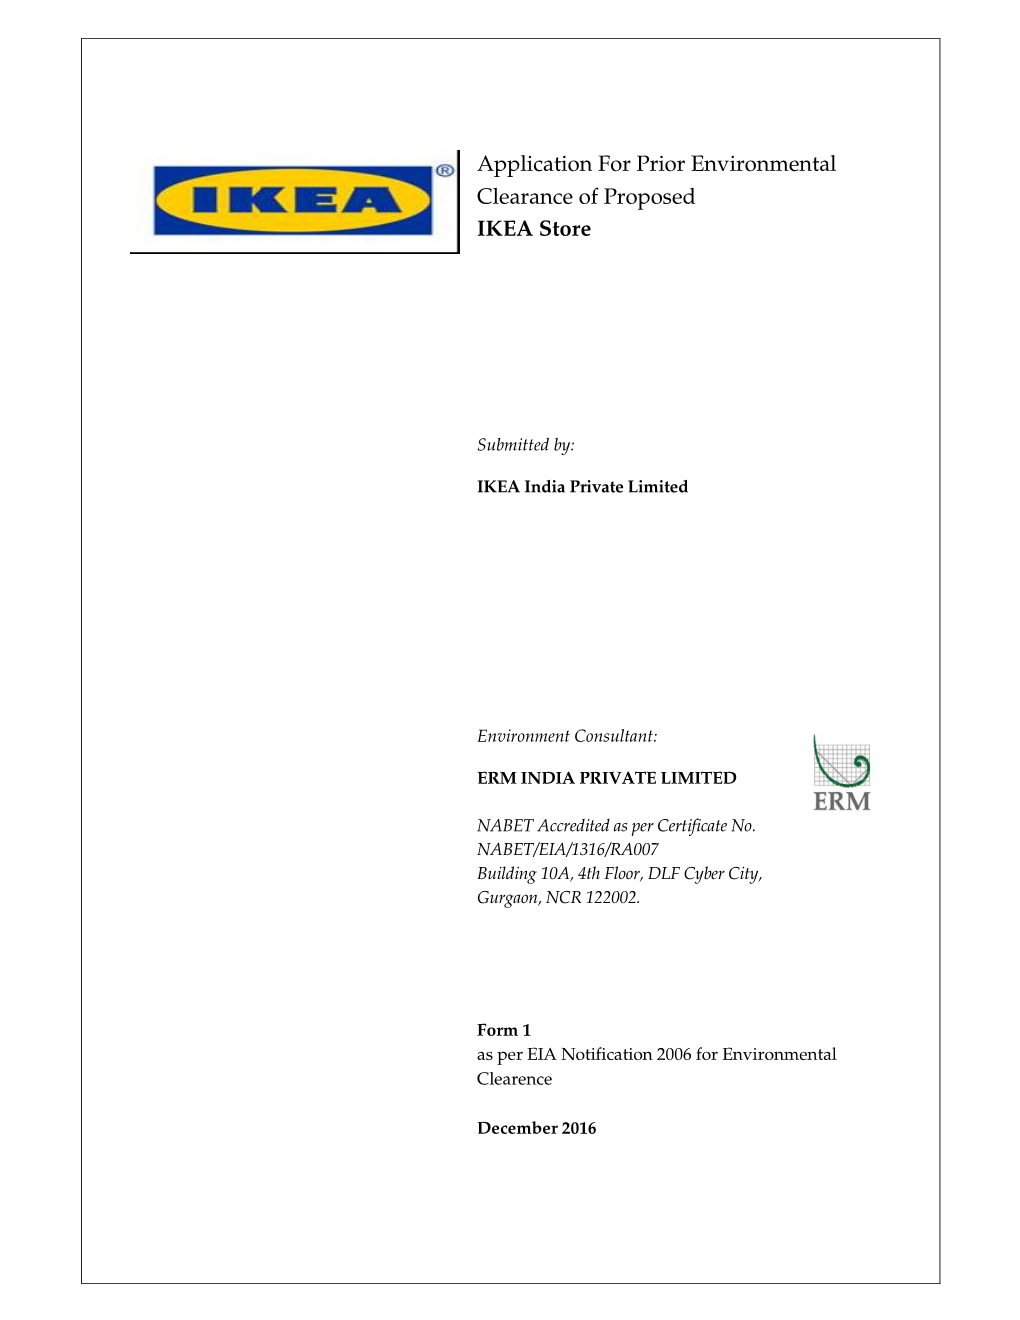 Application for Prior Environmental Clearance of Proposed IKEA Store